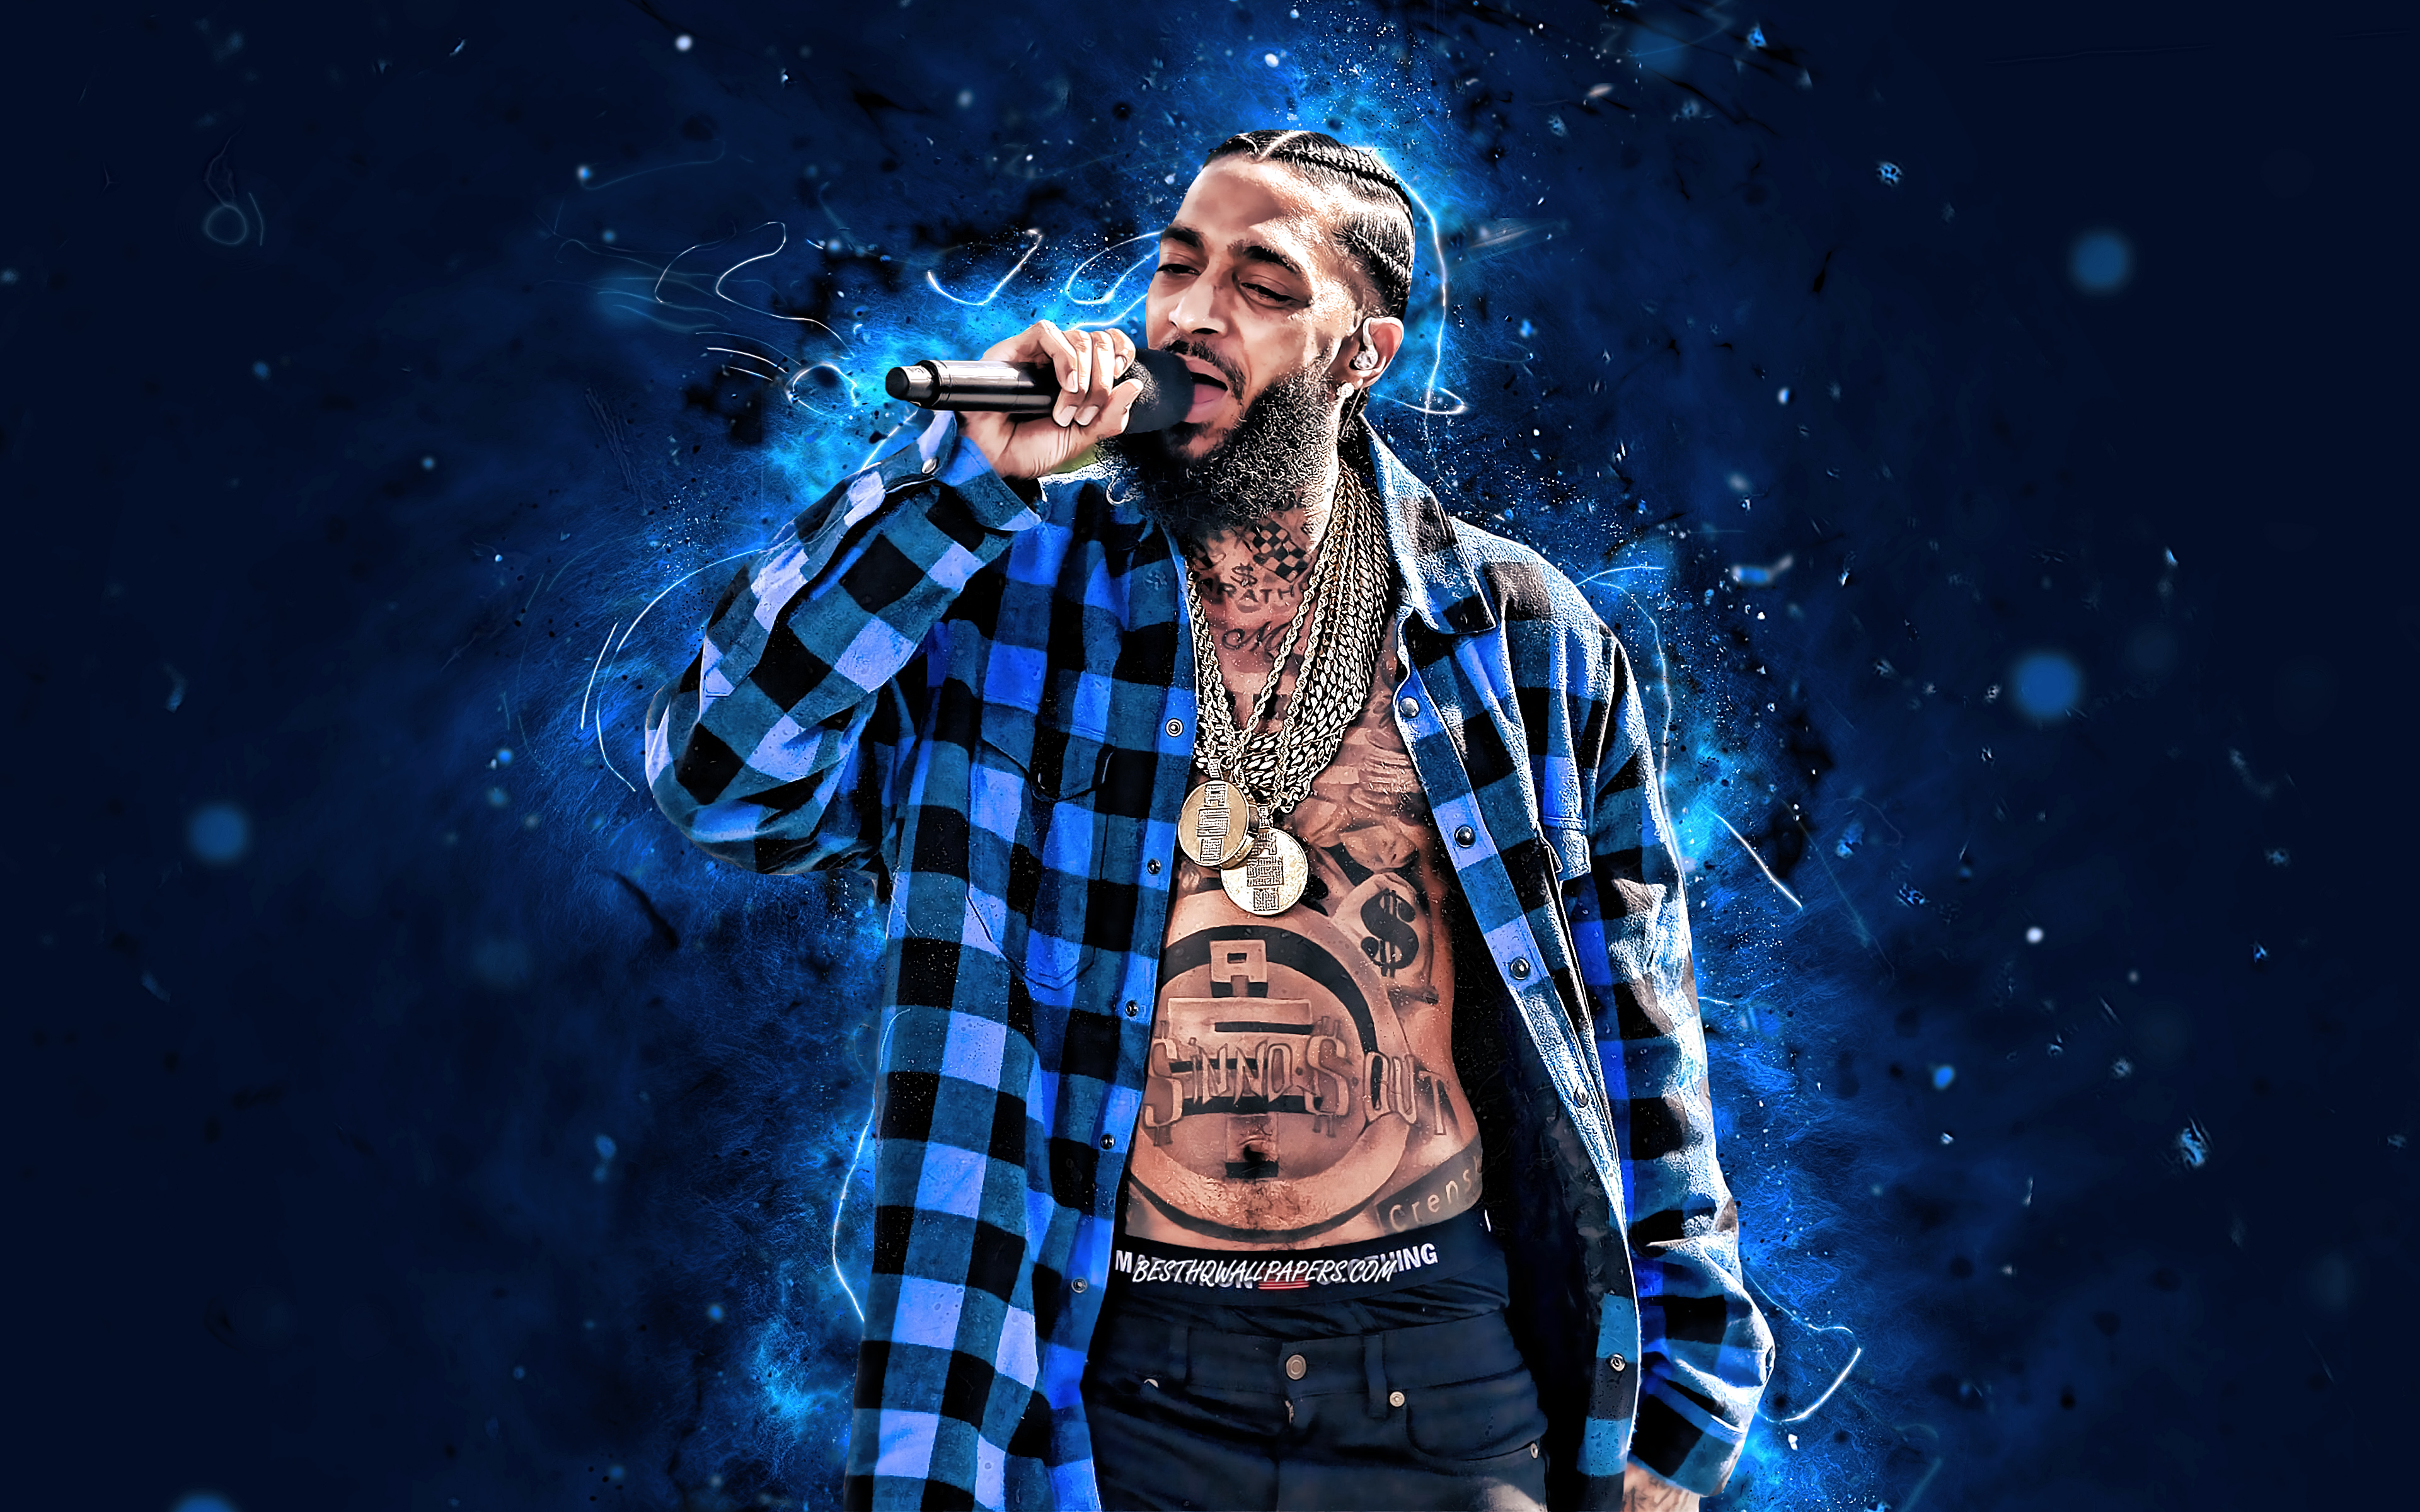 Download wallpaper Nipsey Hussle, 4k, american rapper, blue neon lights, music stars, creative, Ermias Joseph Asghedom, american celebrity, Nipsey Hussle 4K for desktop with resolution 3840x2400. High Quality HD picture wallpaper